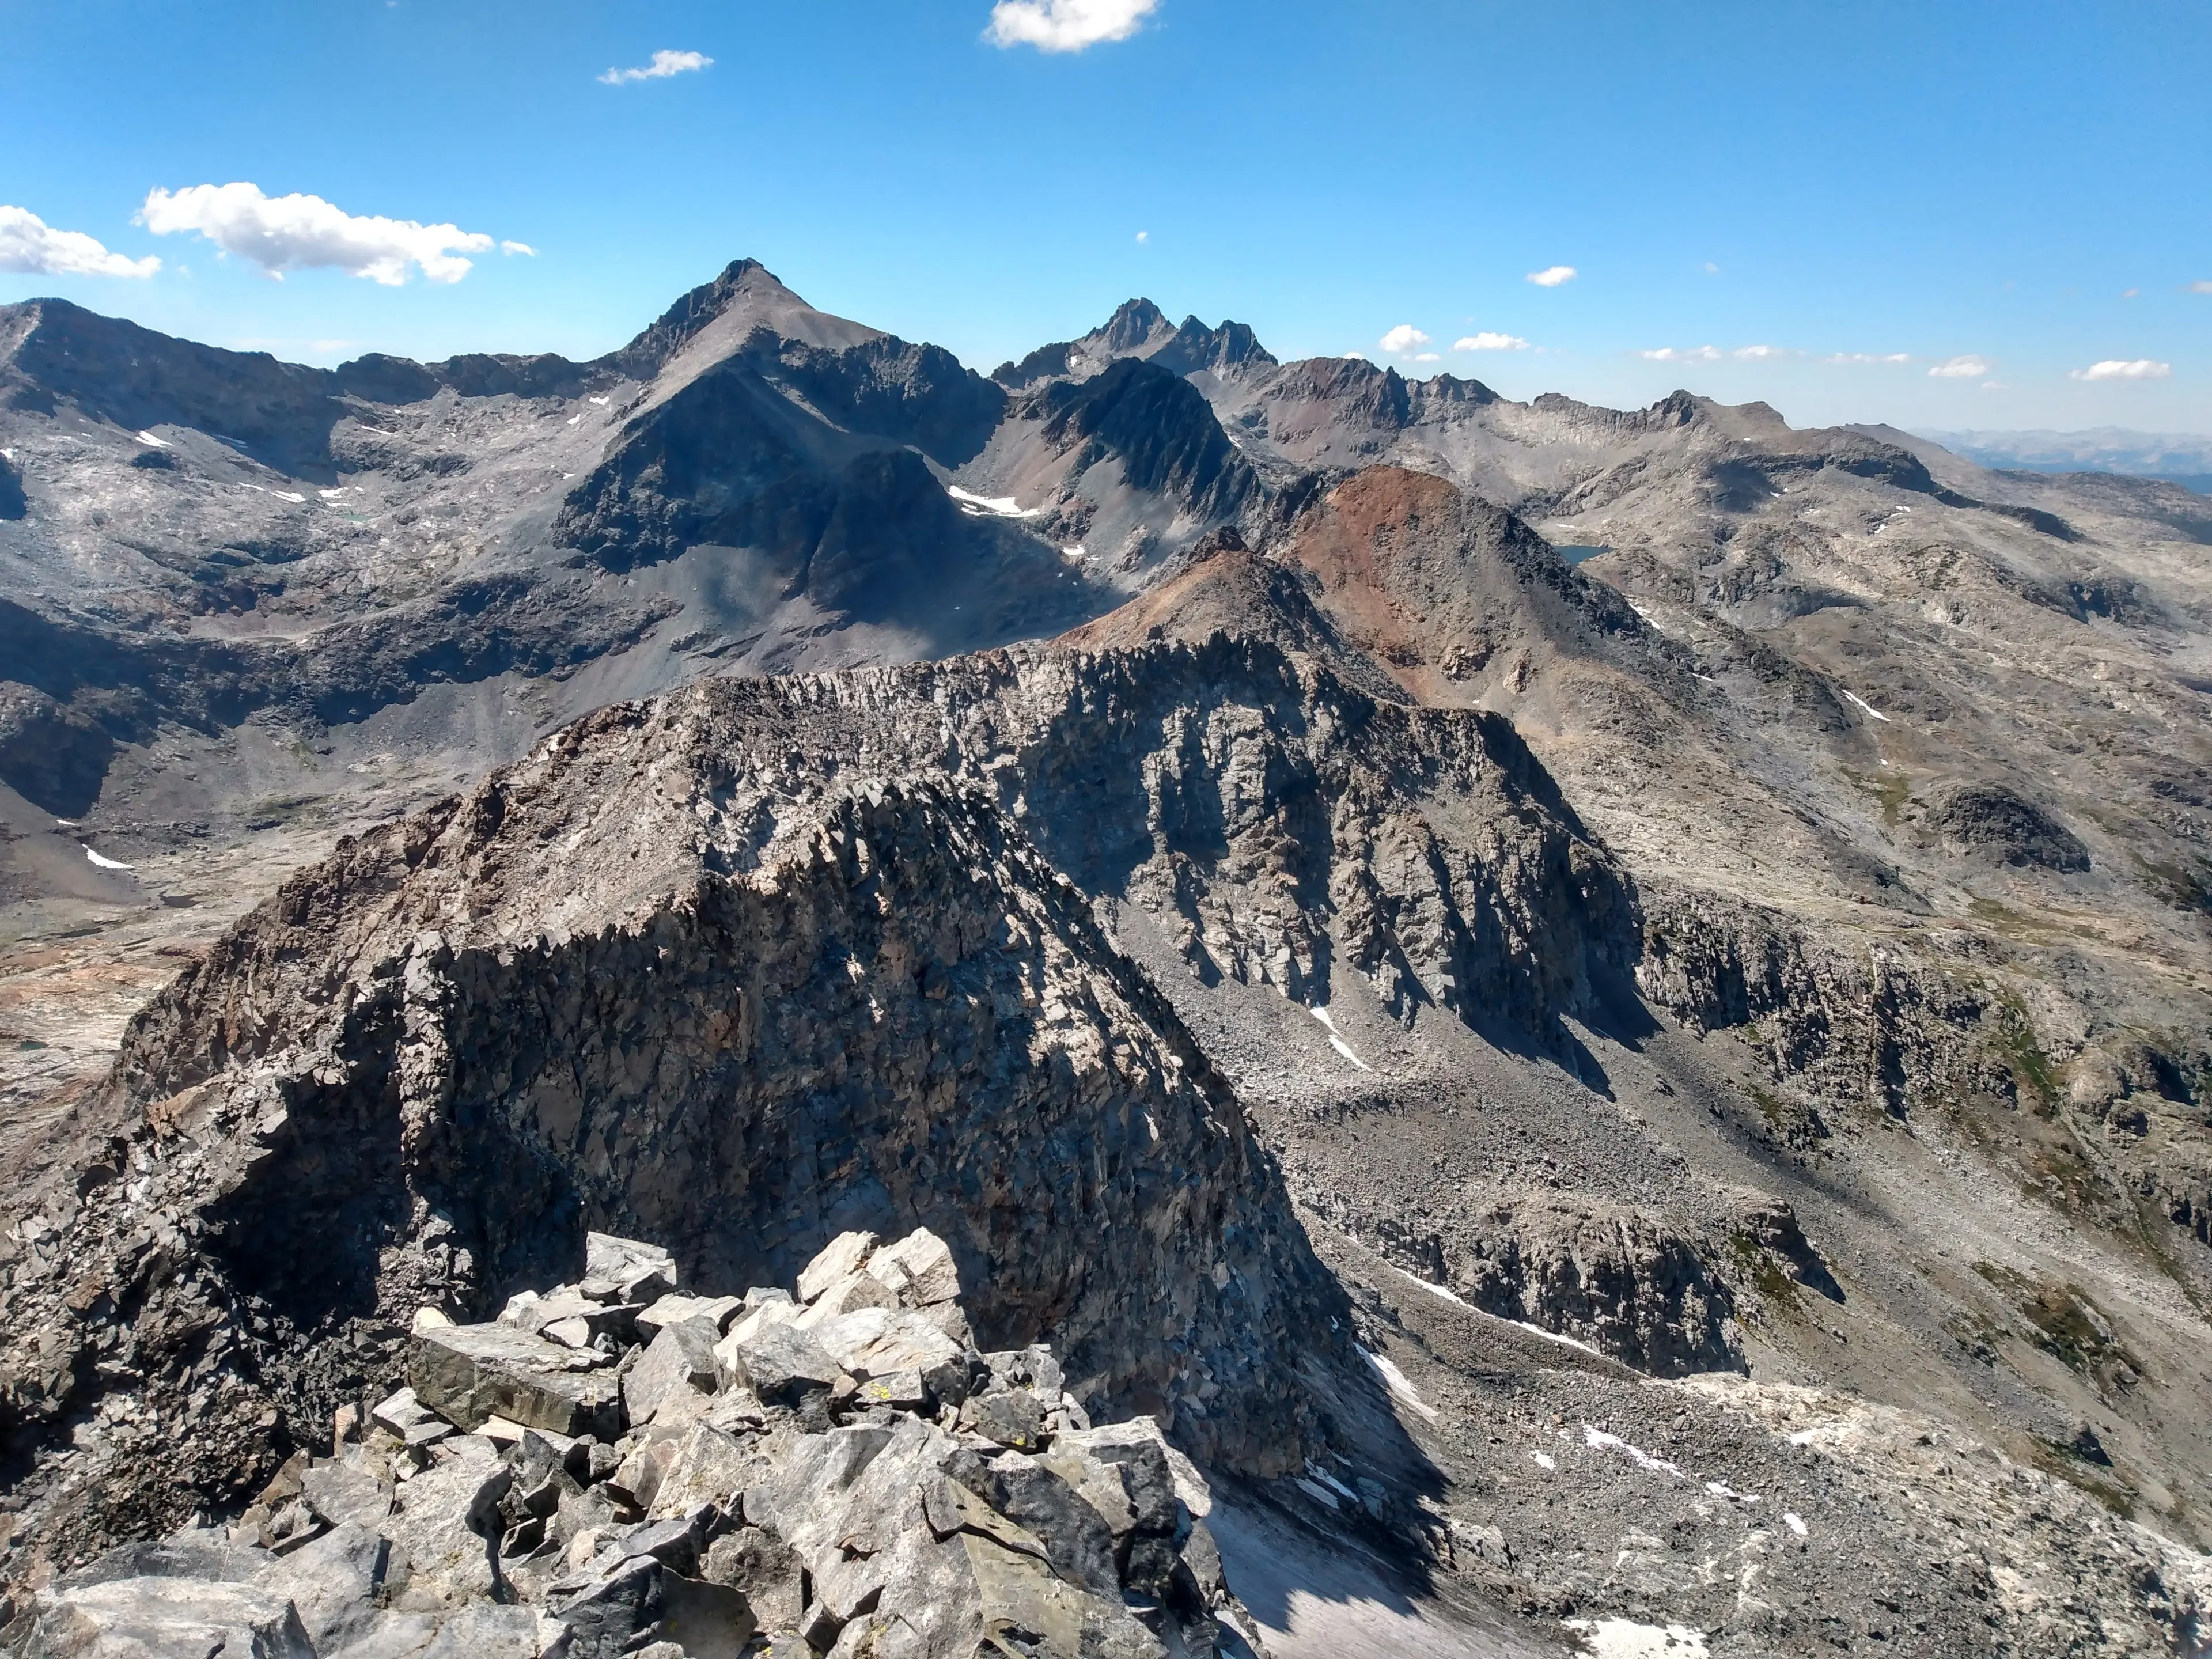 Rodgers Peak (L) and Mounts Lyell and Maclure (R)